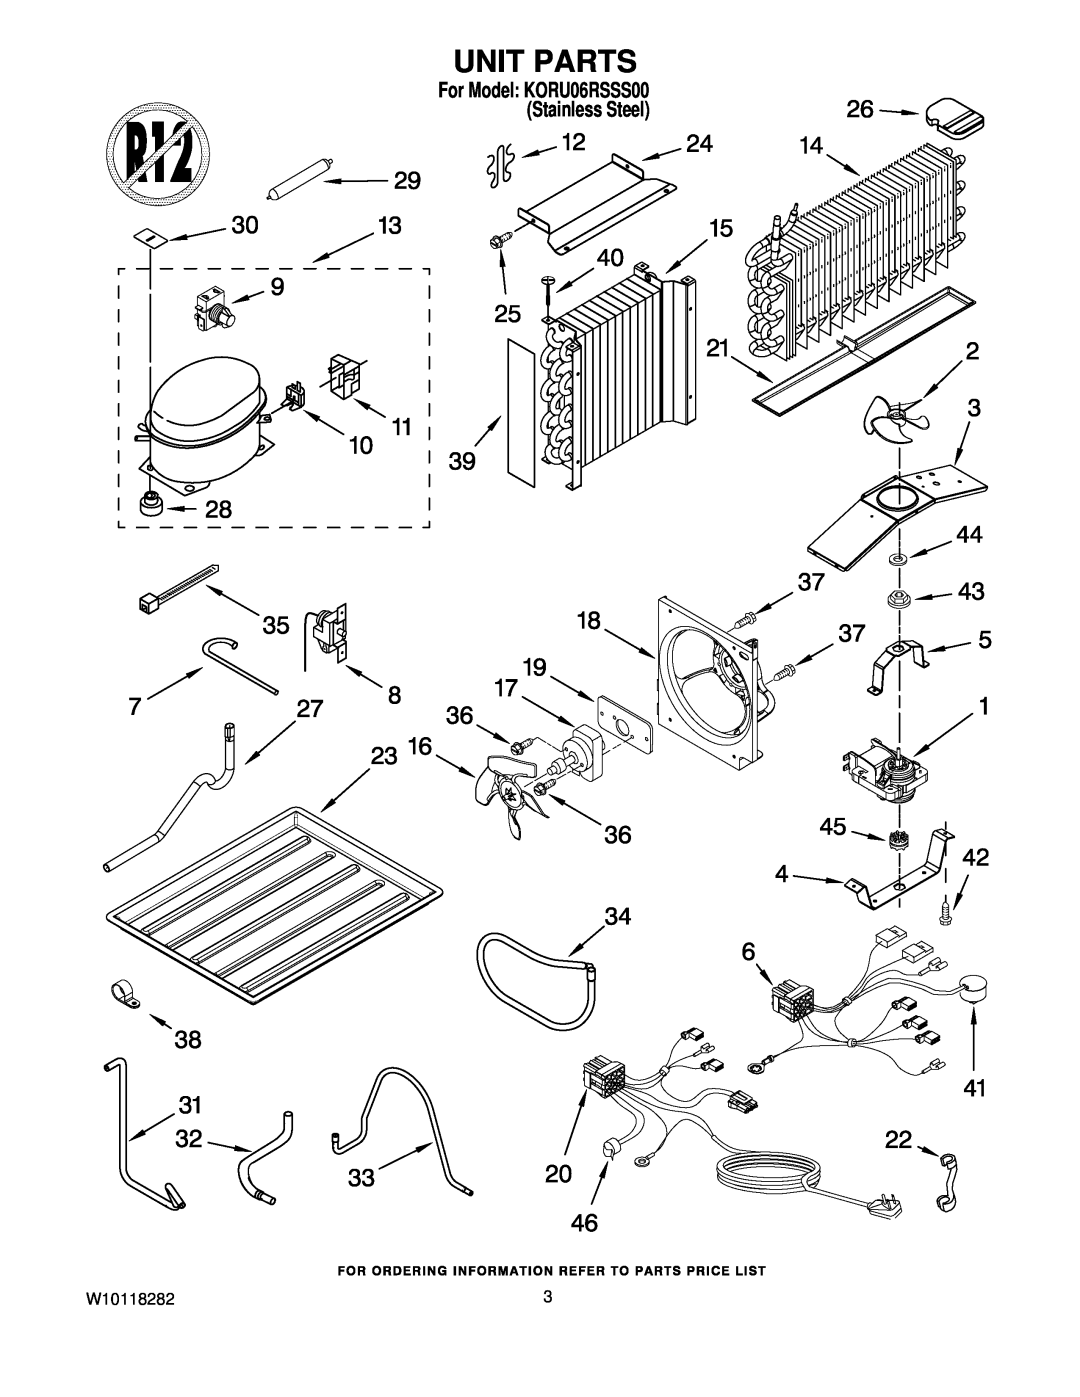 KitchenAid manual Unit Parts, For Model KORU06RSSS00 Stainless Steel, W10118282 